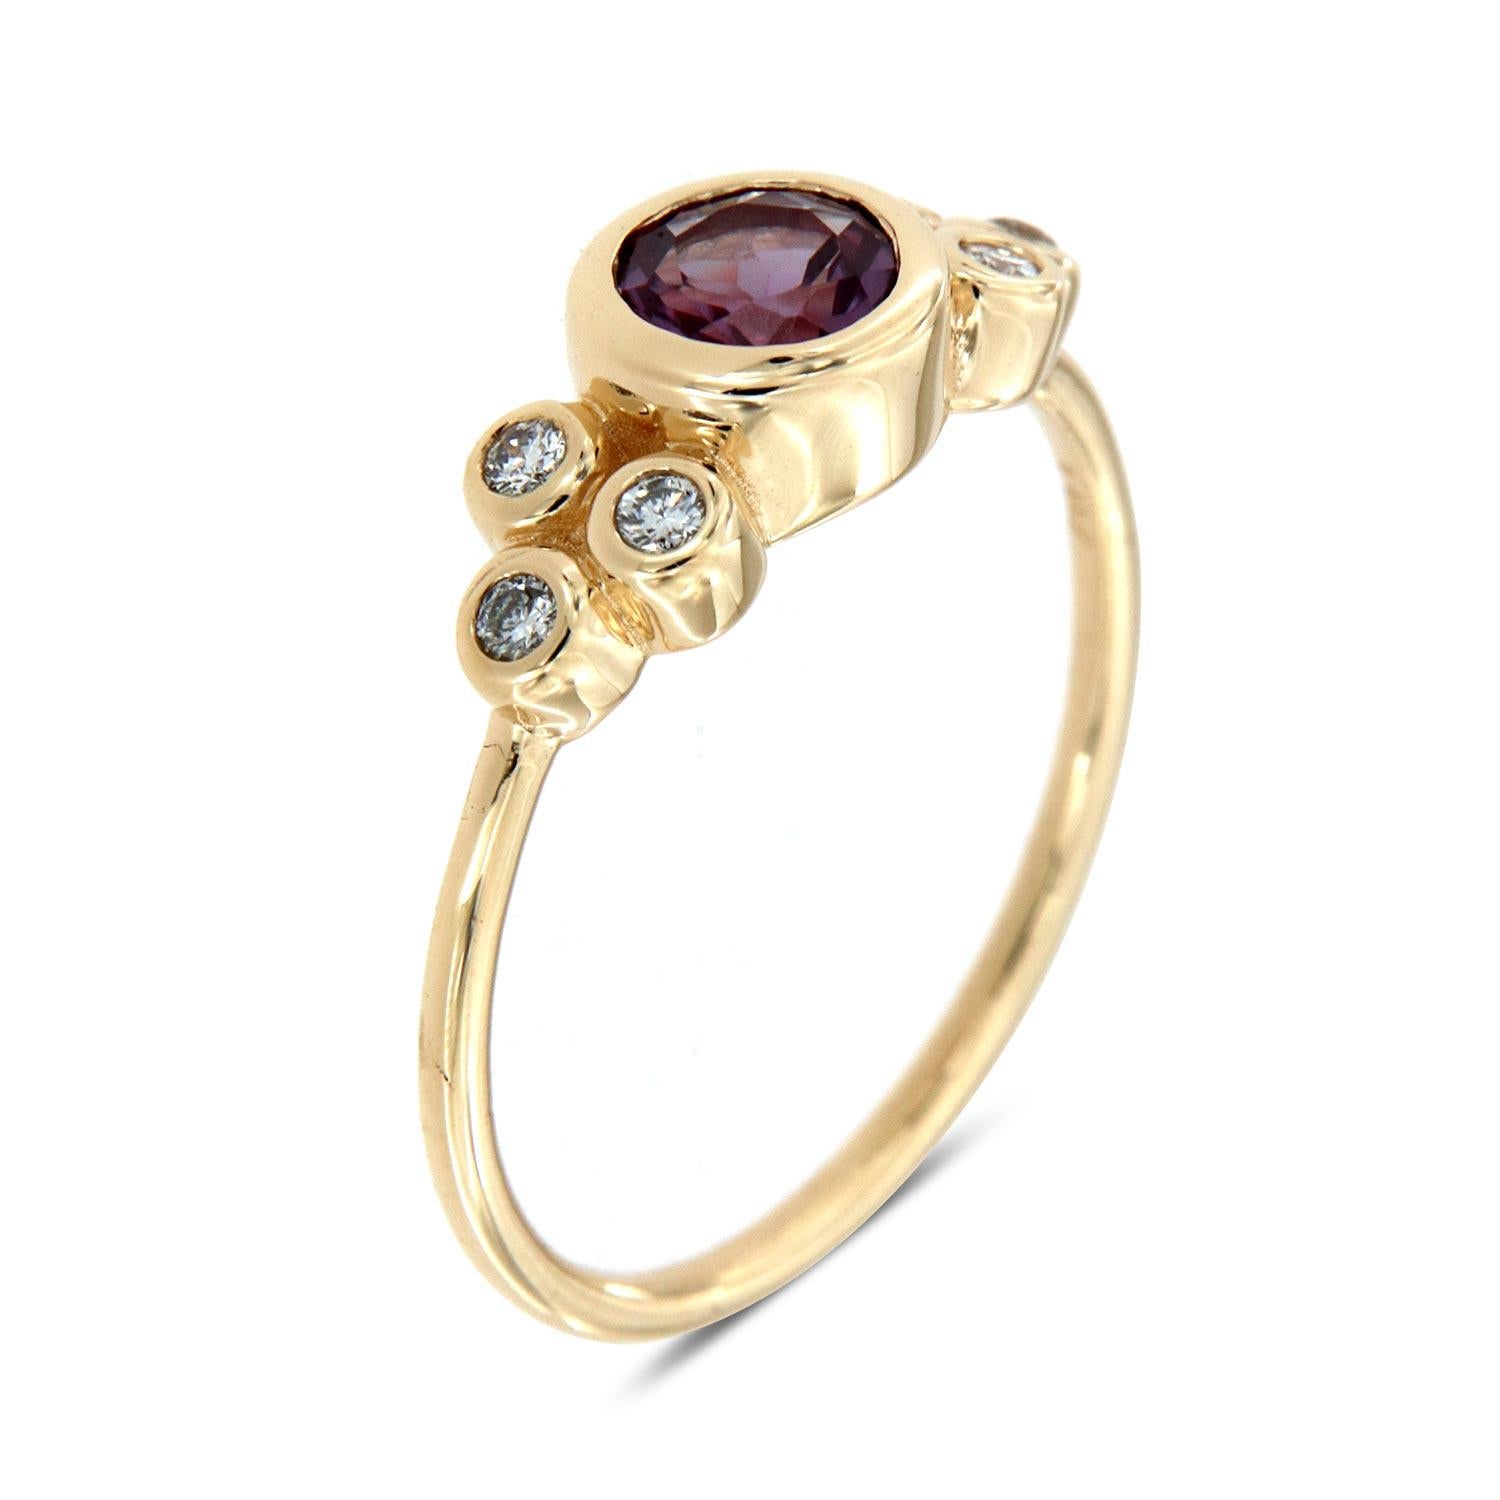 This Delicate ring features six (6) round brilliant diamonds in a thin bezel set on top of a 1.20 mm band. The center Gemstone is 0.59 Carat Round Natural Purple Sapphire from Sri-Lanka. It's stackable & it's fun! Experience the difference in